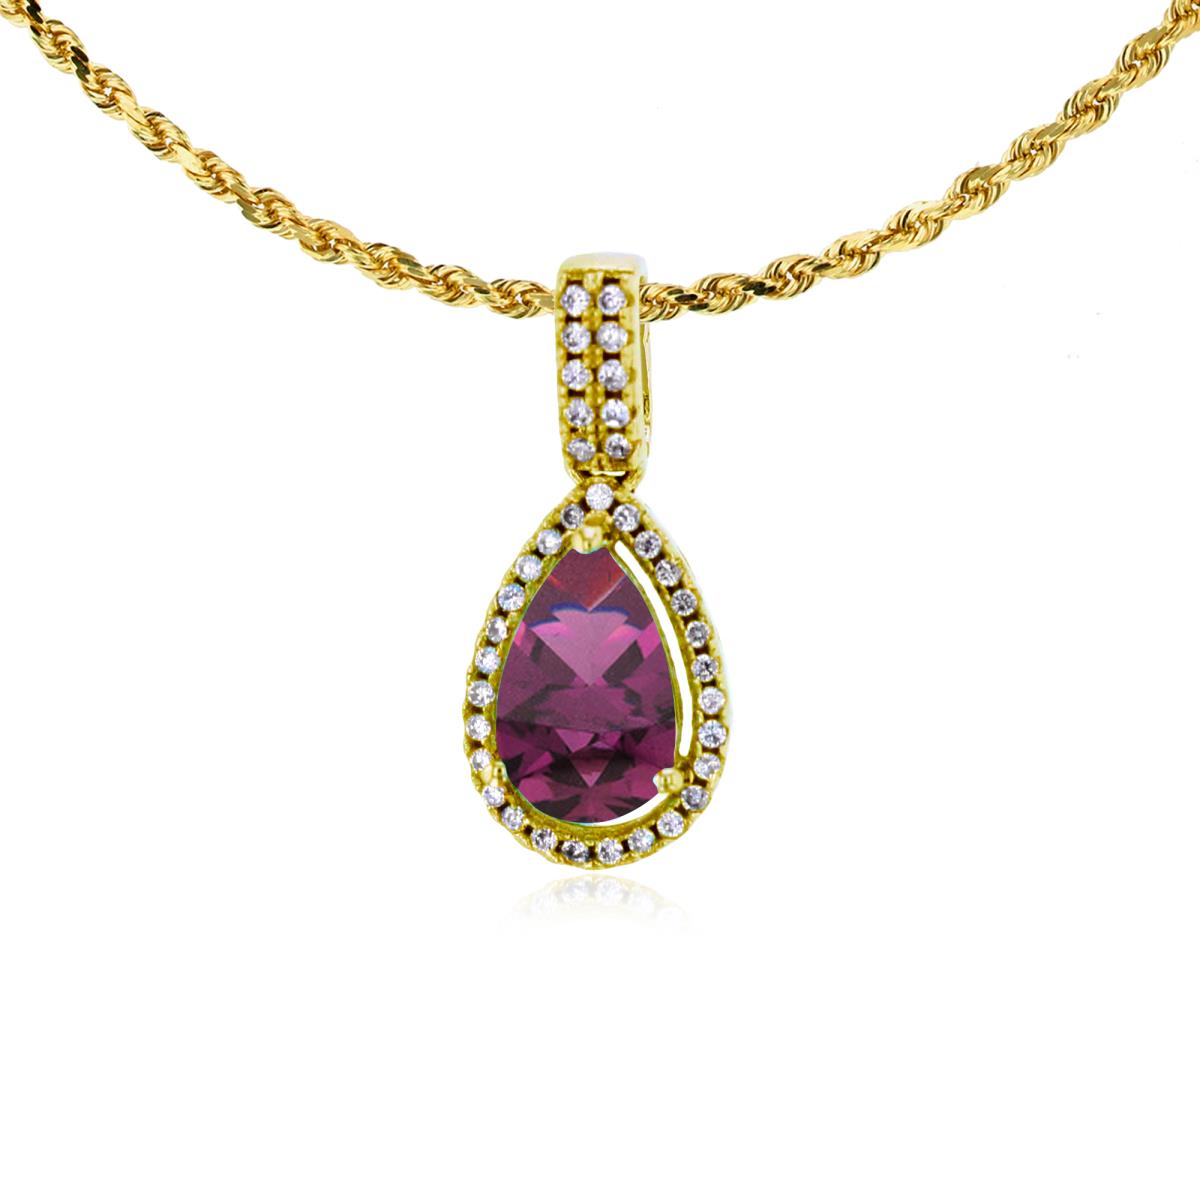 10K Yellow Gold 8x5mm Pear Cut Rhodolite & 0.11 CTTW Diamond Halo 18" Rope Chain Necklace